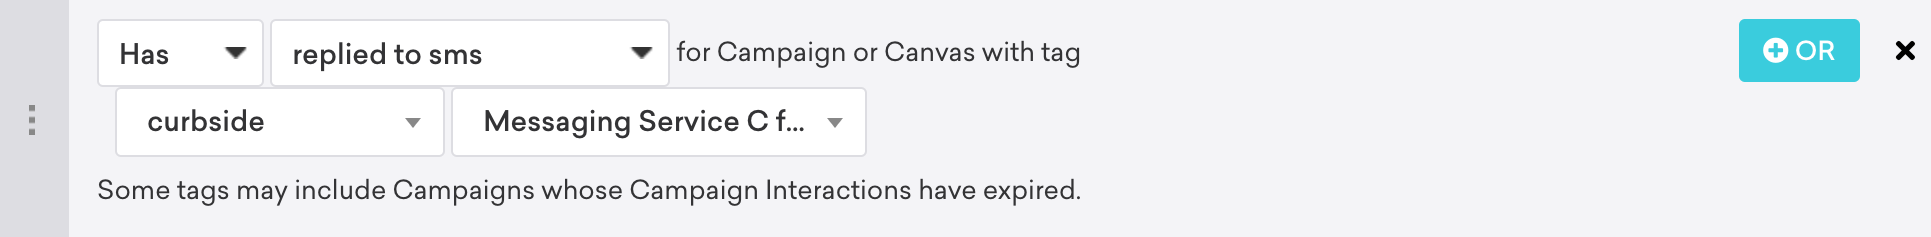 Campaign with the filter "Has replied to SMS" for campaign or Canvas with tag "Curbside Messaging Service C".